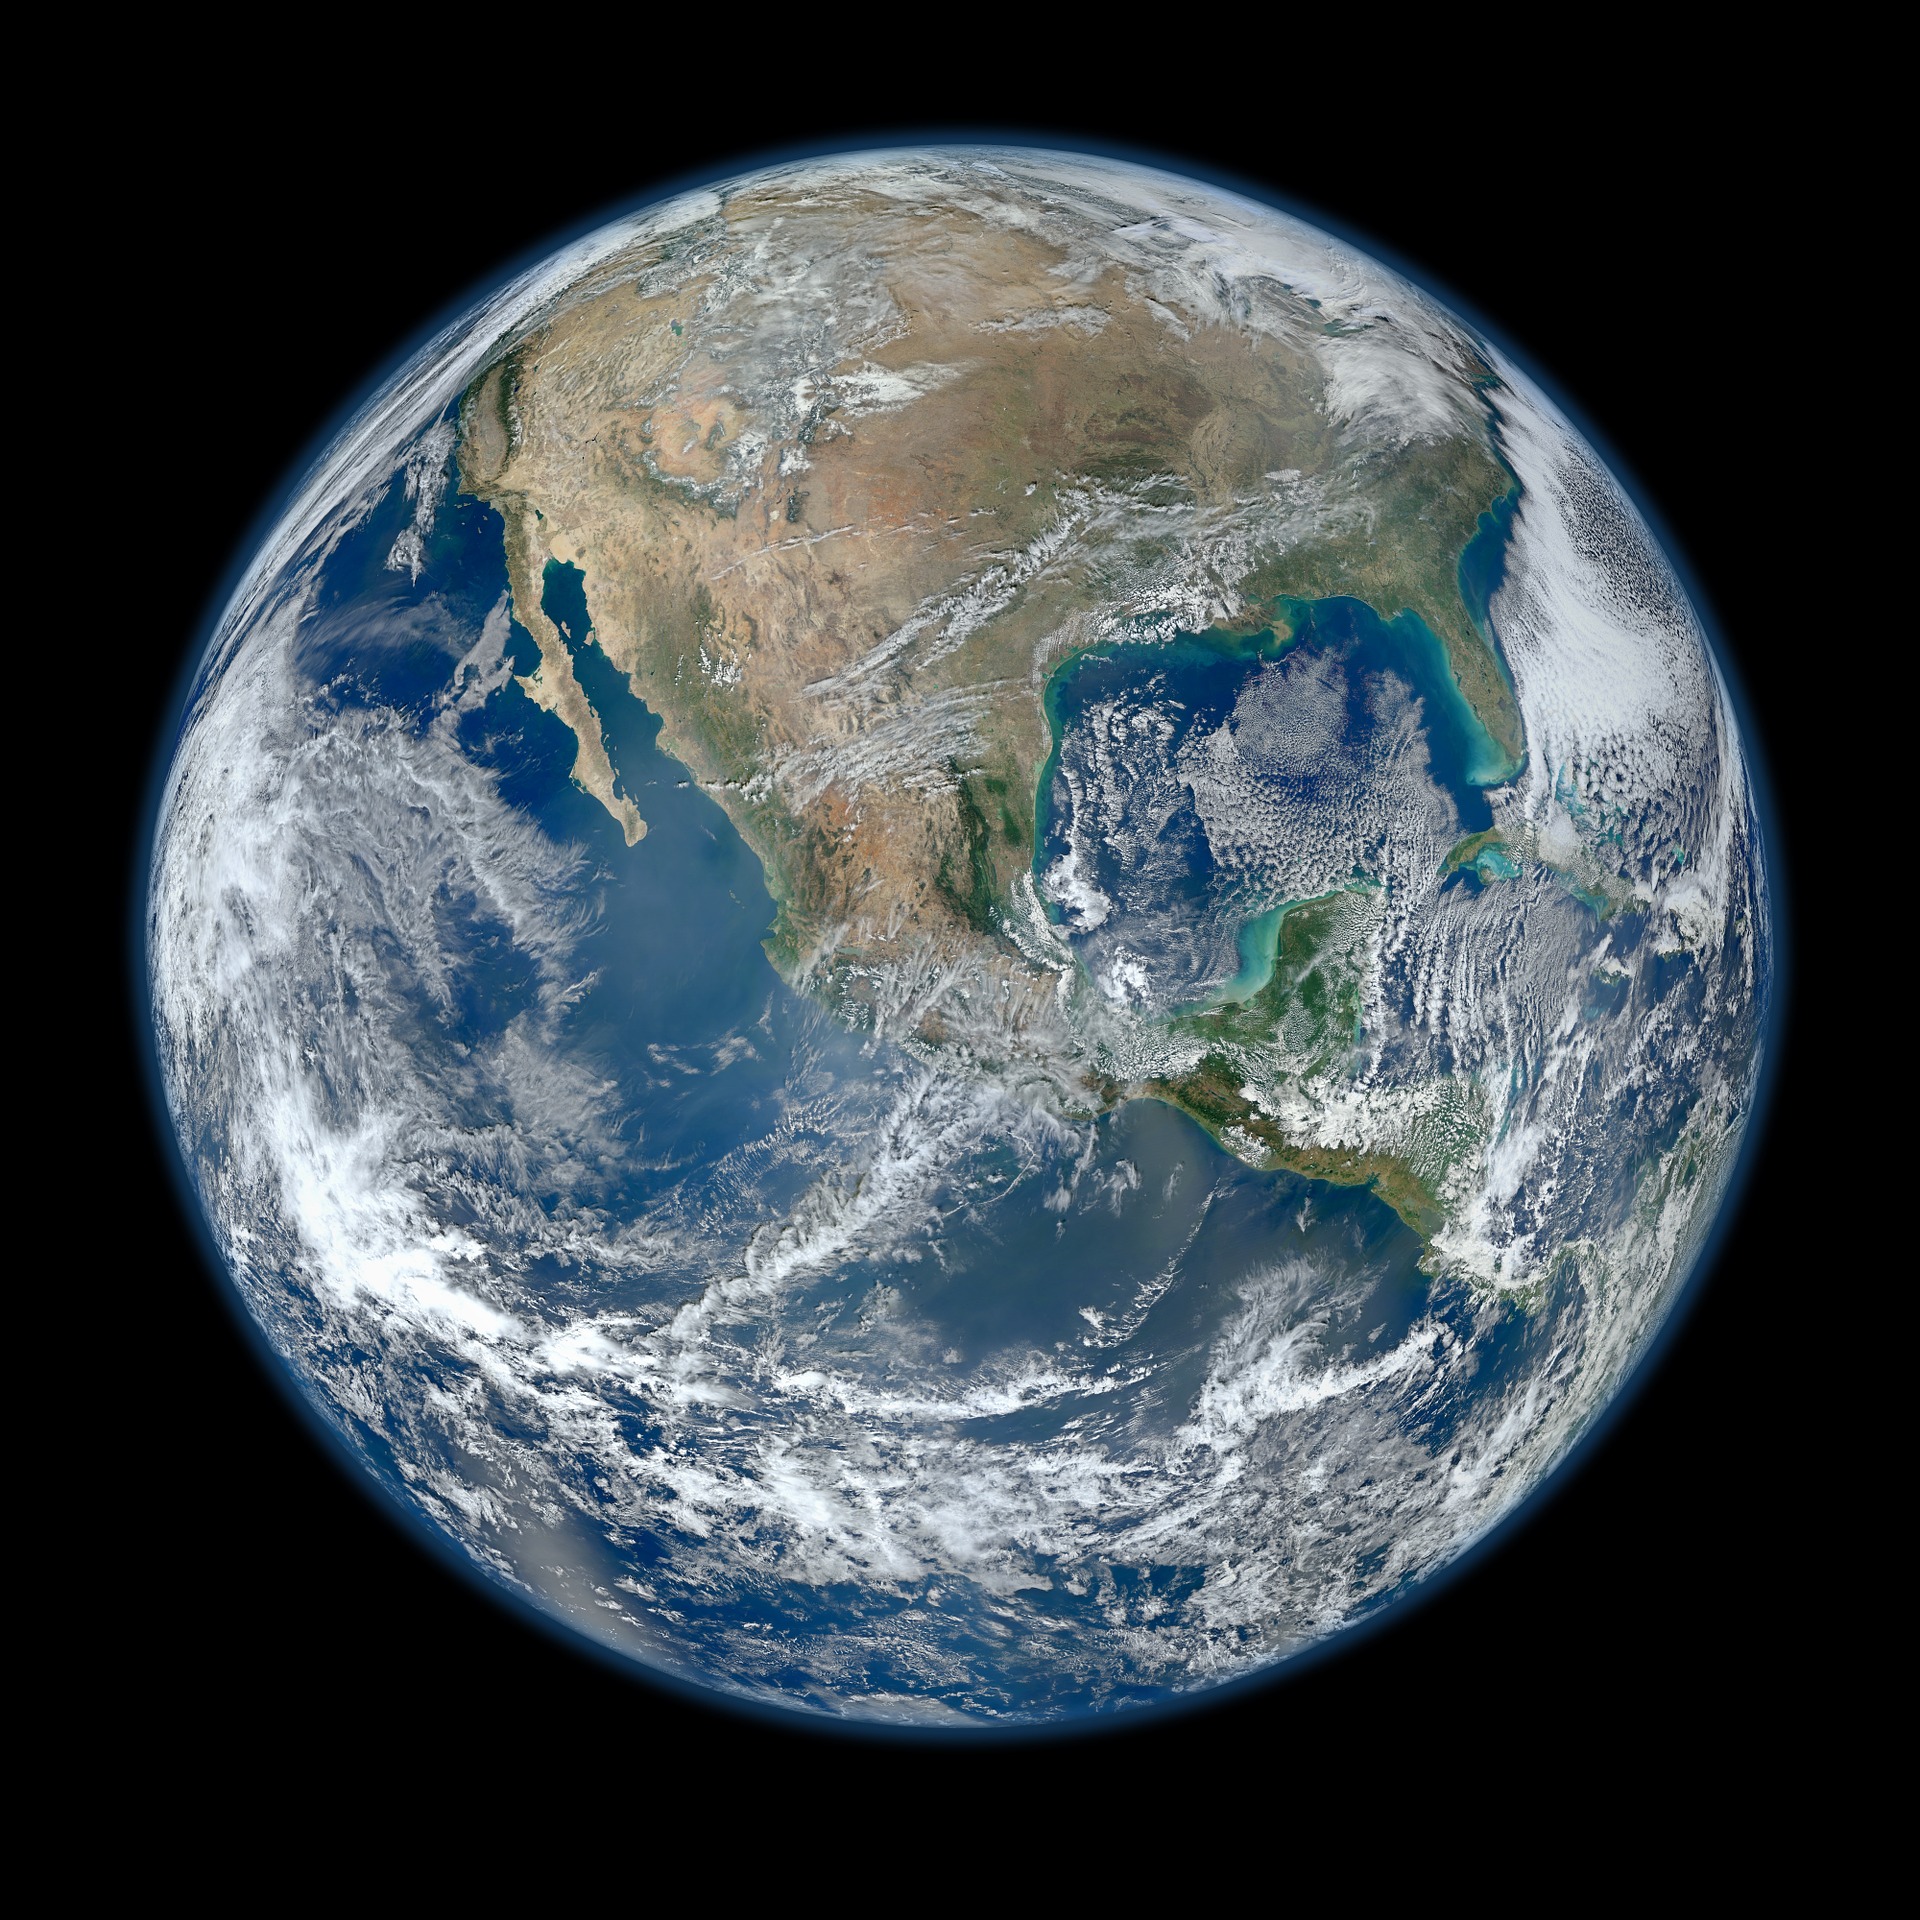 Image of the Earth taken from the telescope